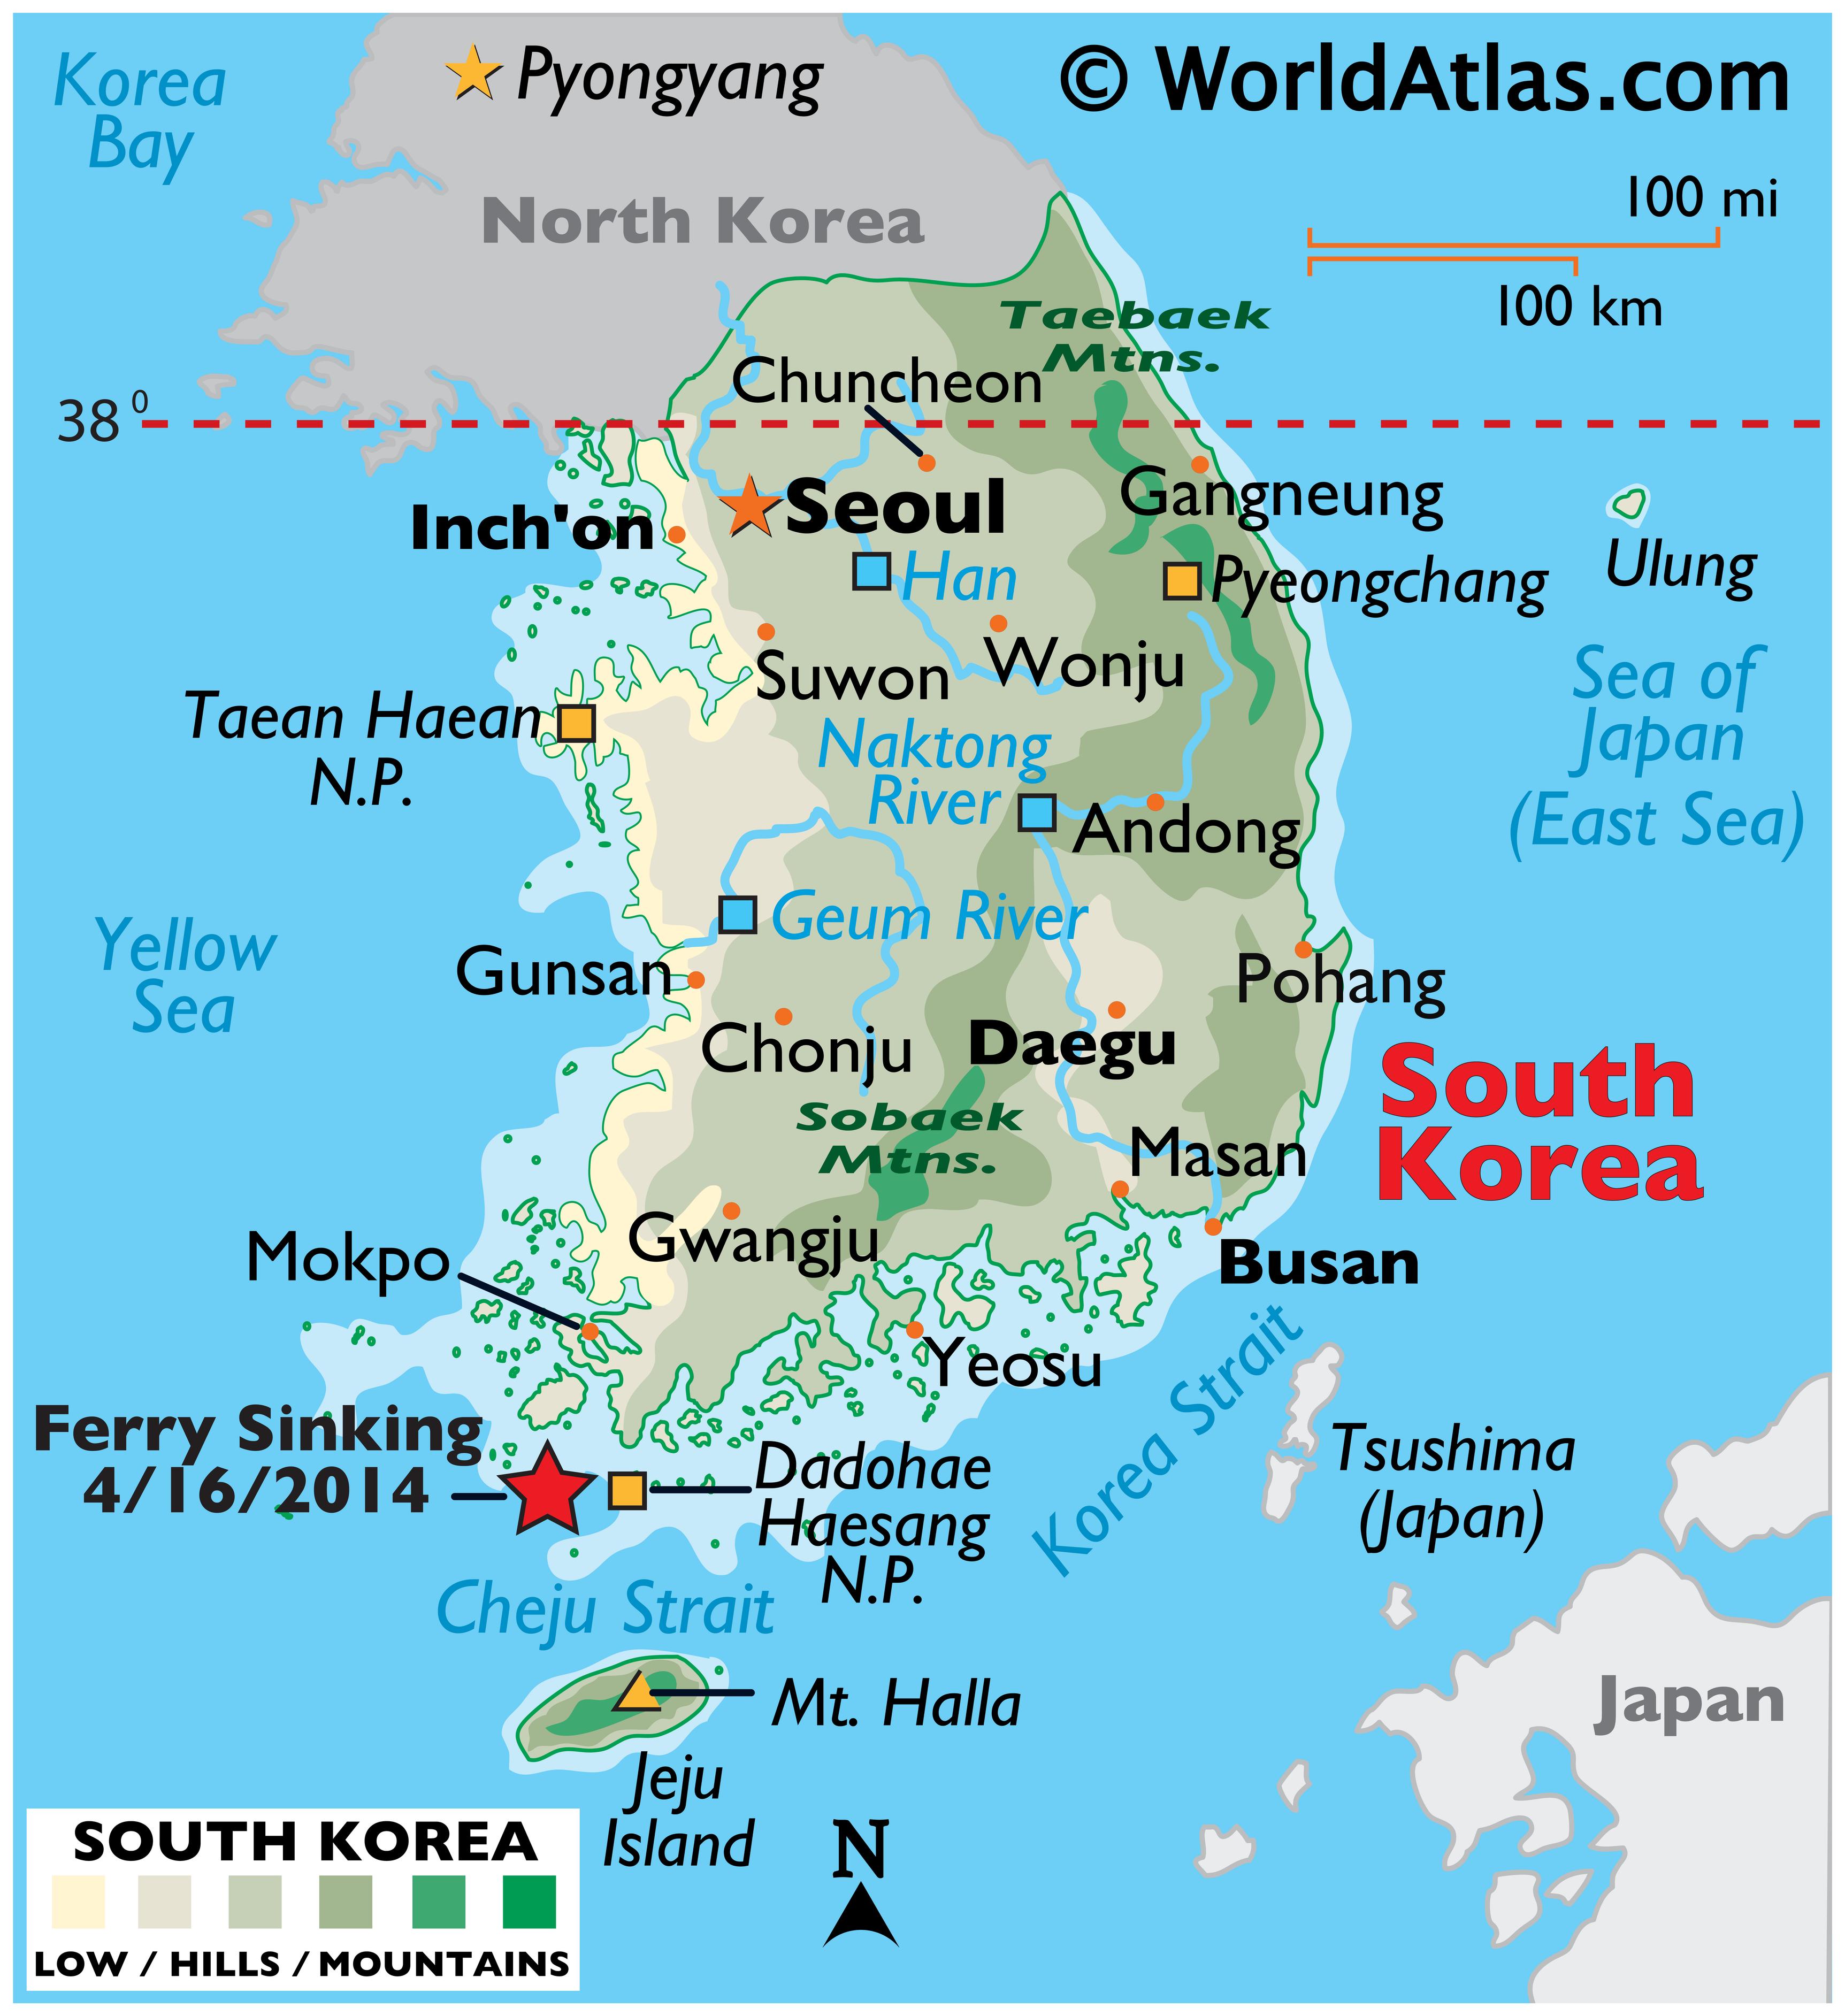 South Korea Attractions, Travel and Vacation Suggestions - Worldatlas.com